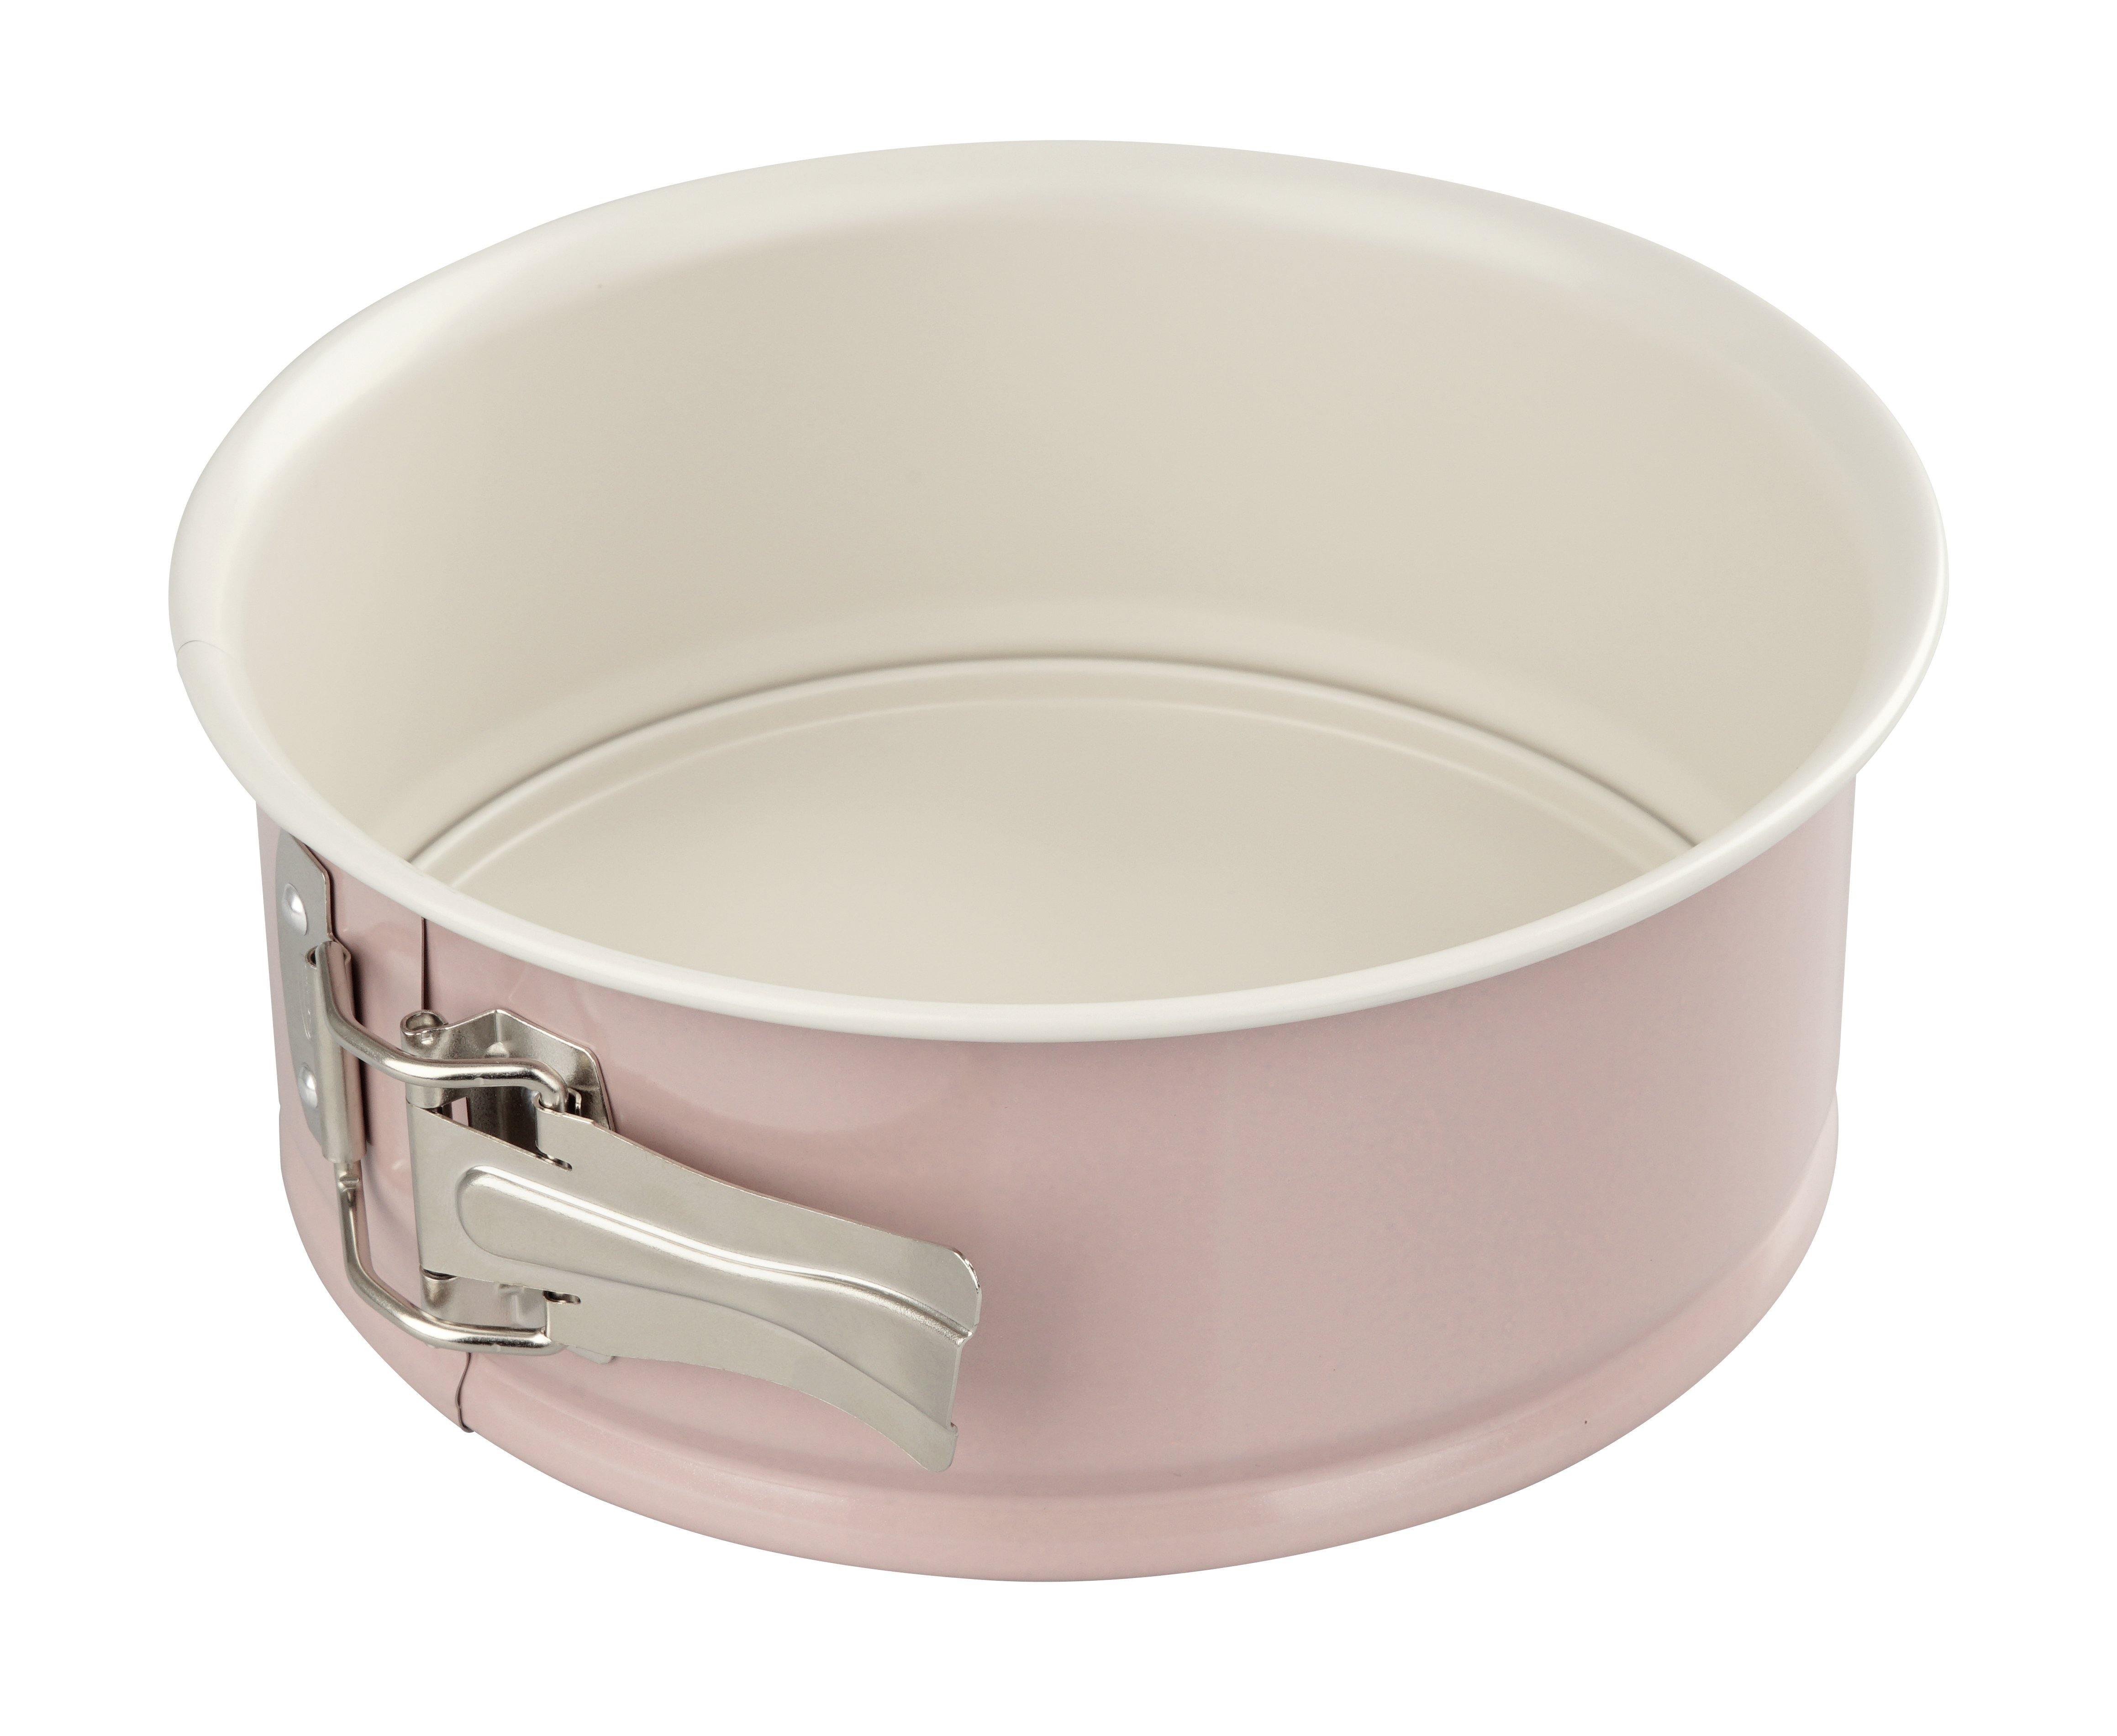 Dr. Oetker "Retro" Springform Steel Plate With Ceramic Reinforced Non-Stick Coating With High Rim, Rose/CrÃ¨me, 18X8 Cm - Whole and All